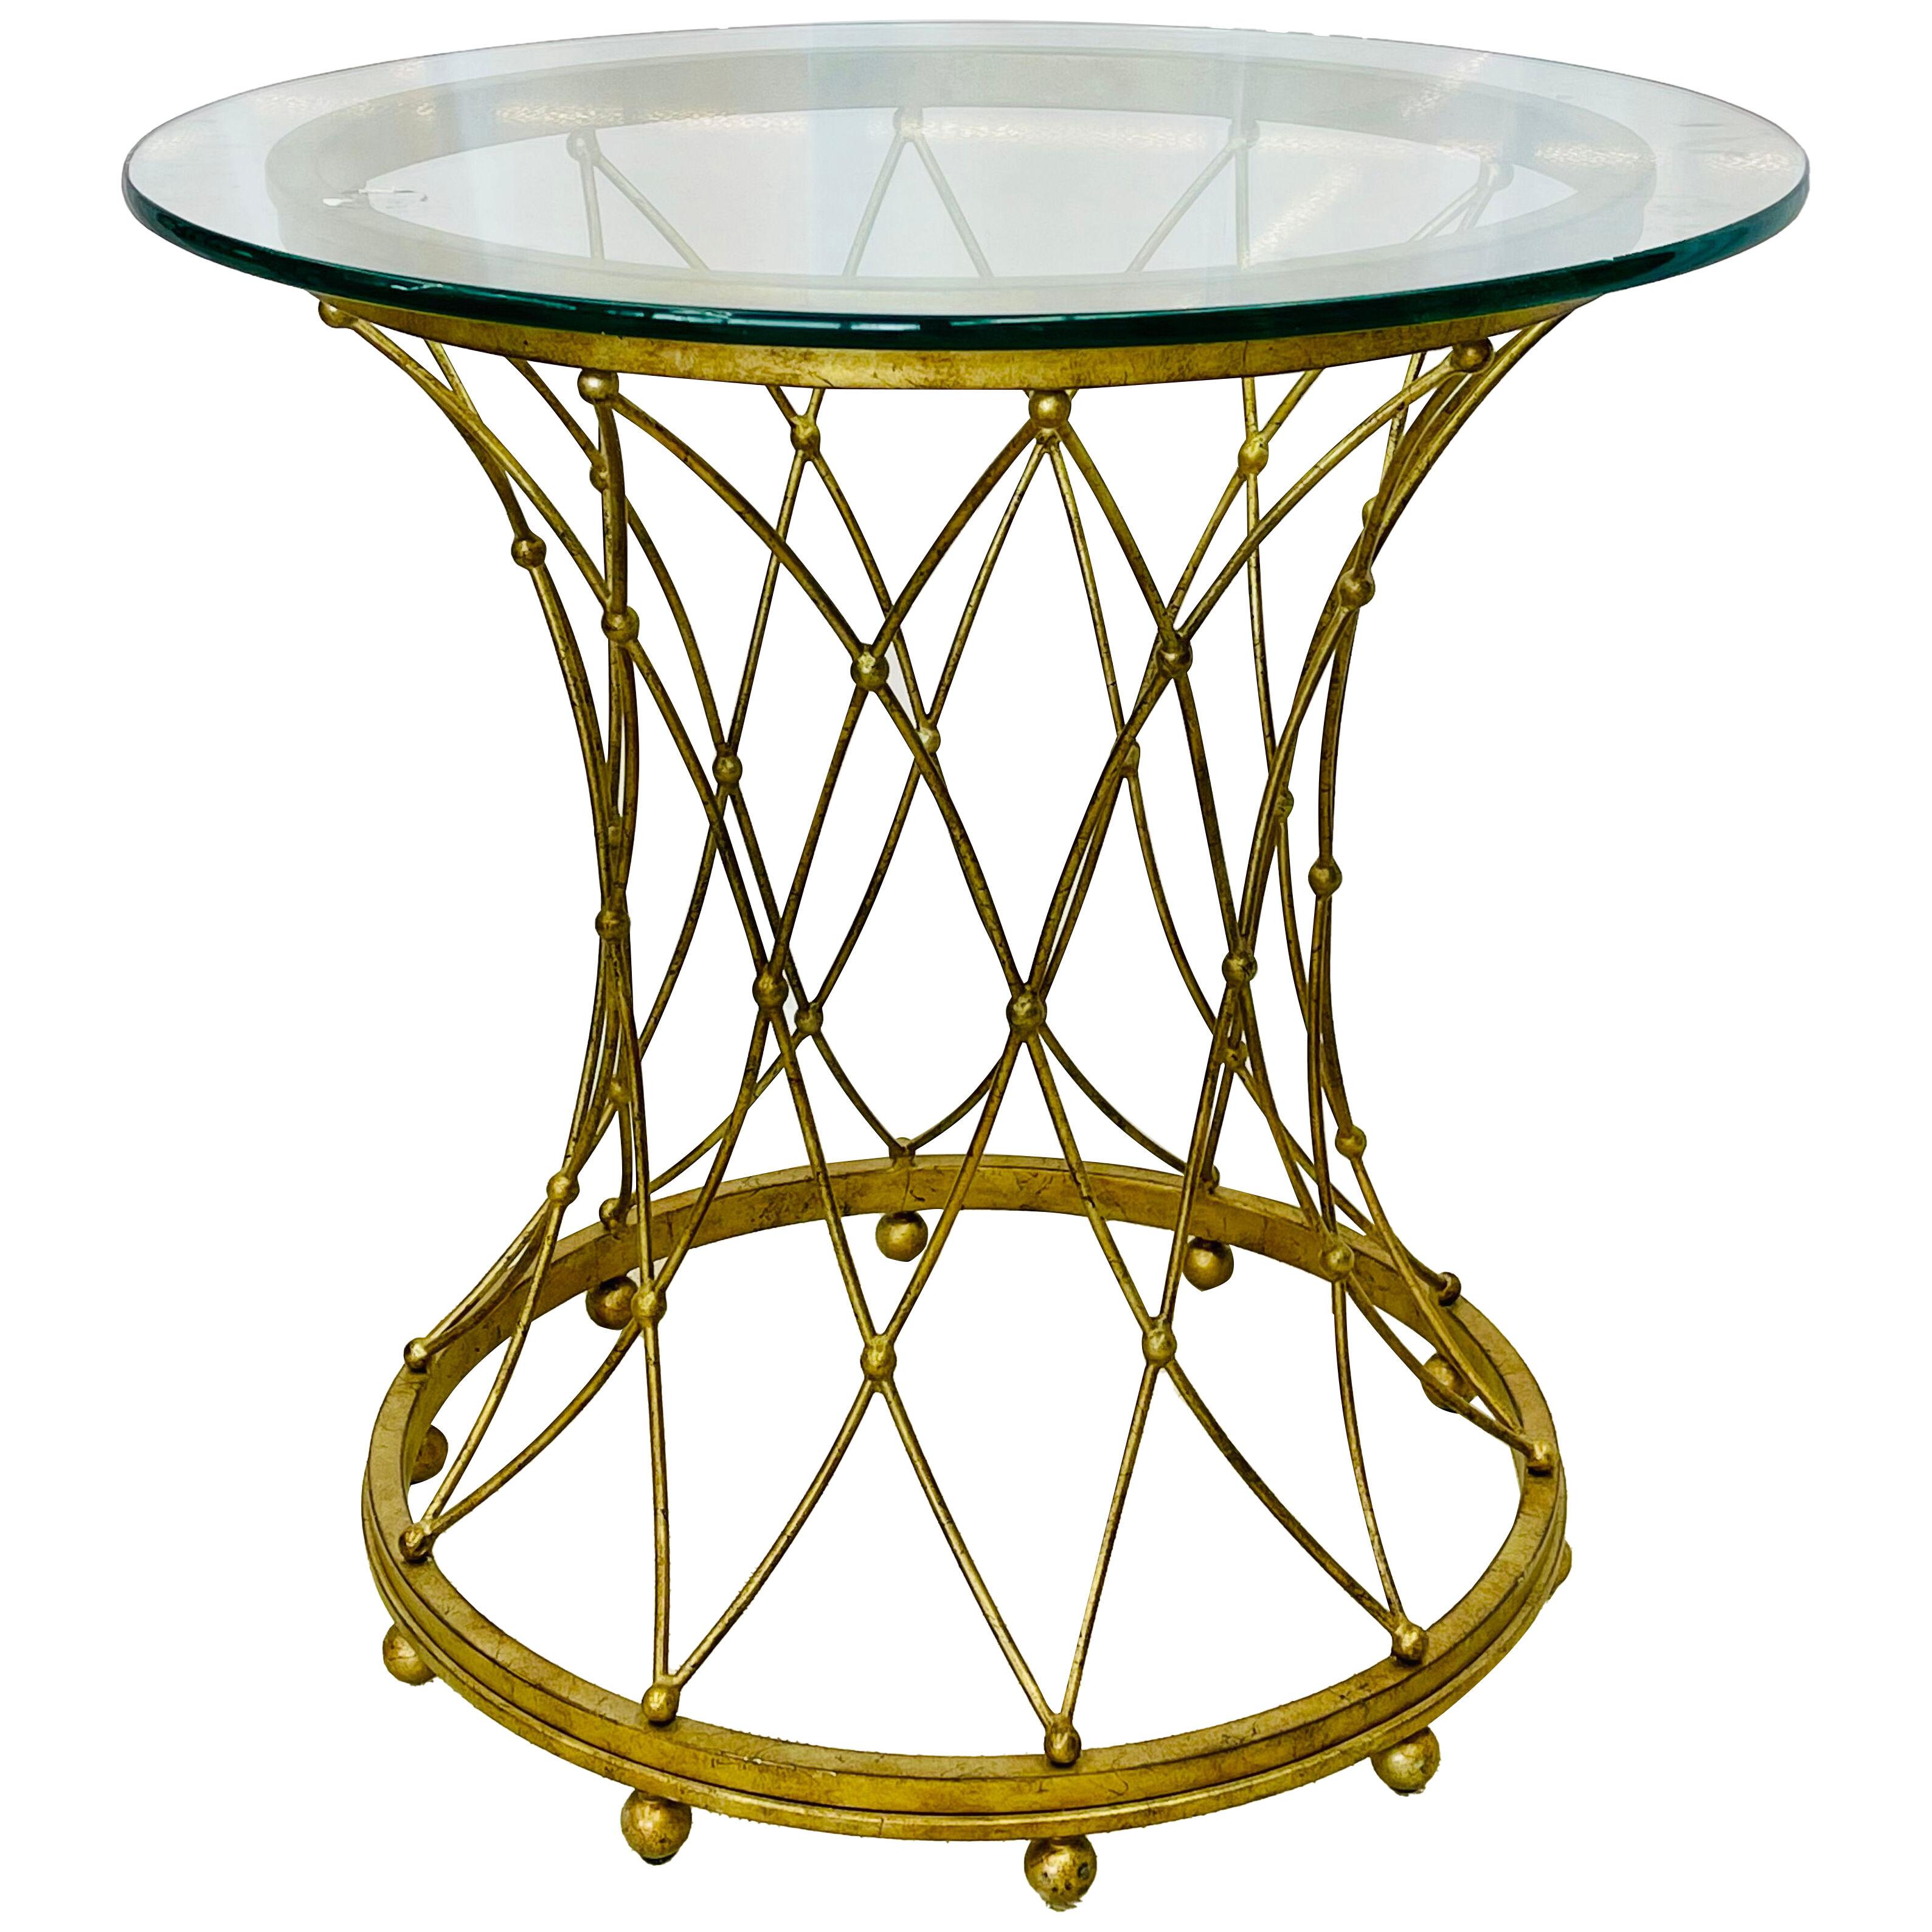 Neoclassical, Maison Jansen Style Round Gilt Metal Coffee Table, Side Table